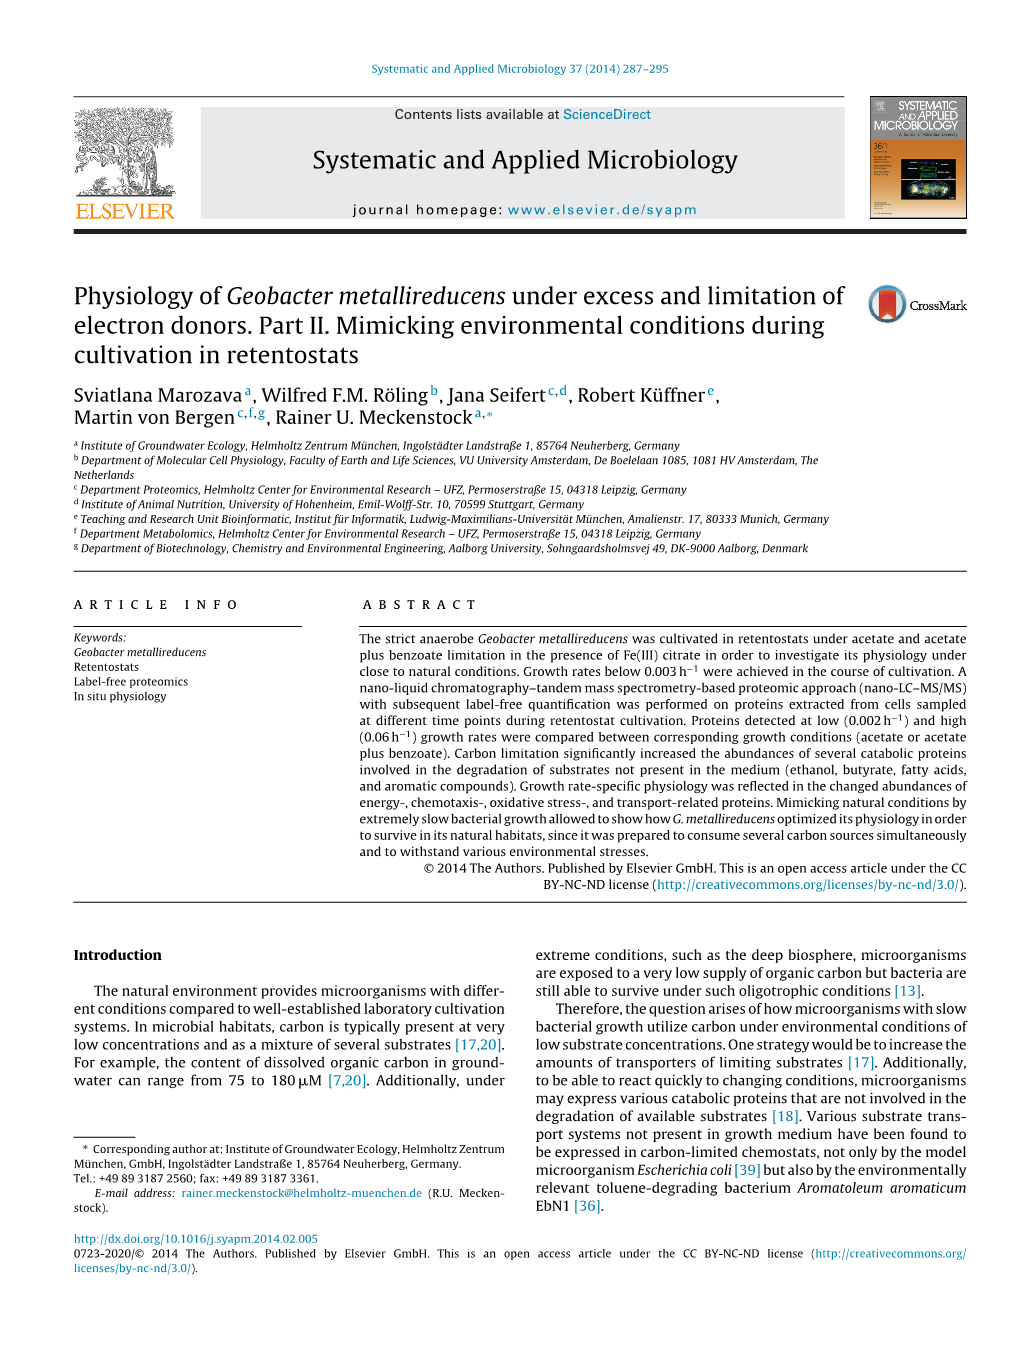 Physiology of Geobacter Metallireducens Under Excess and Limitation Of